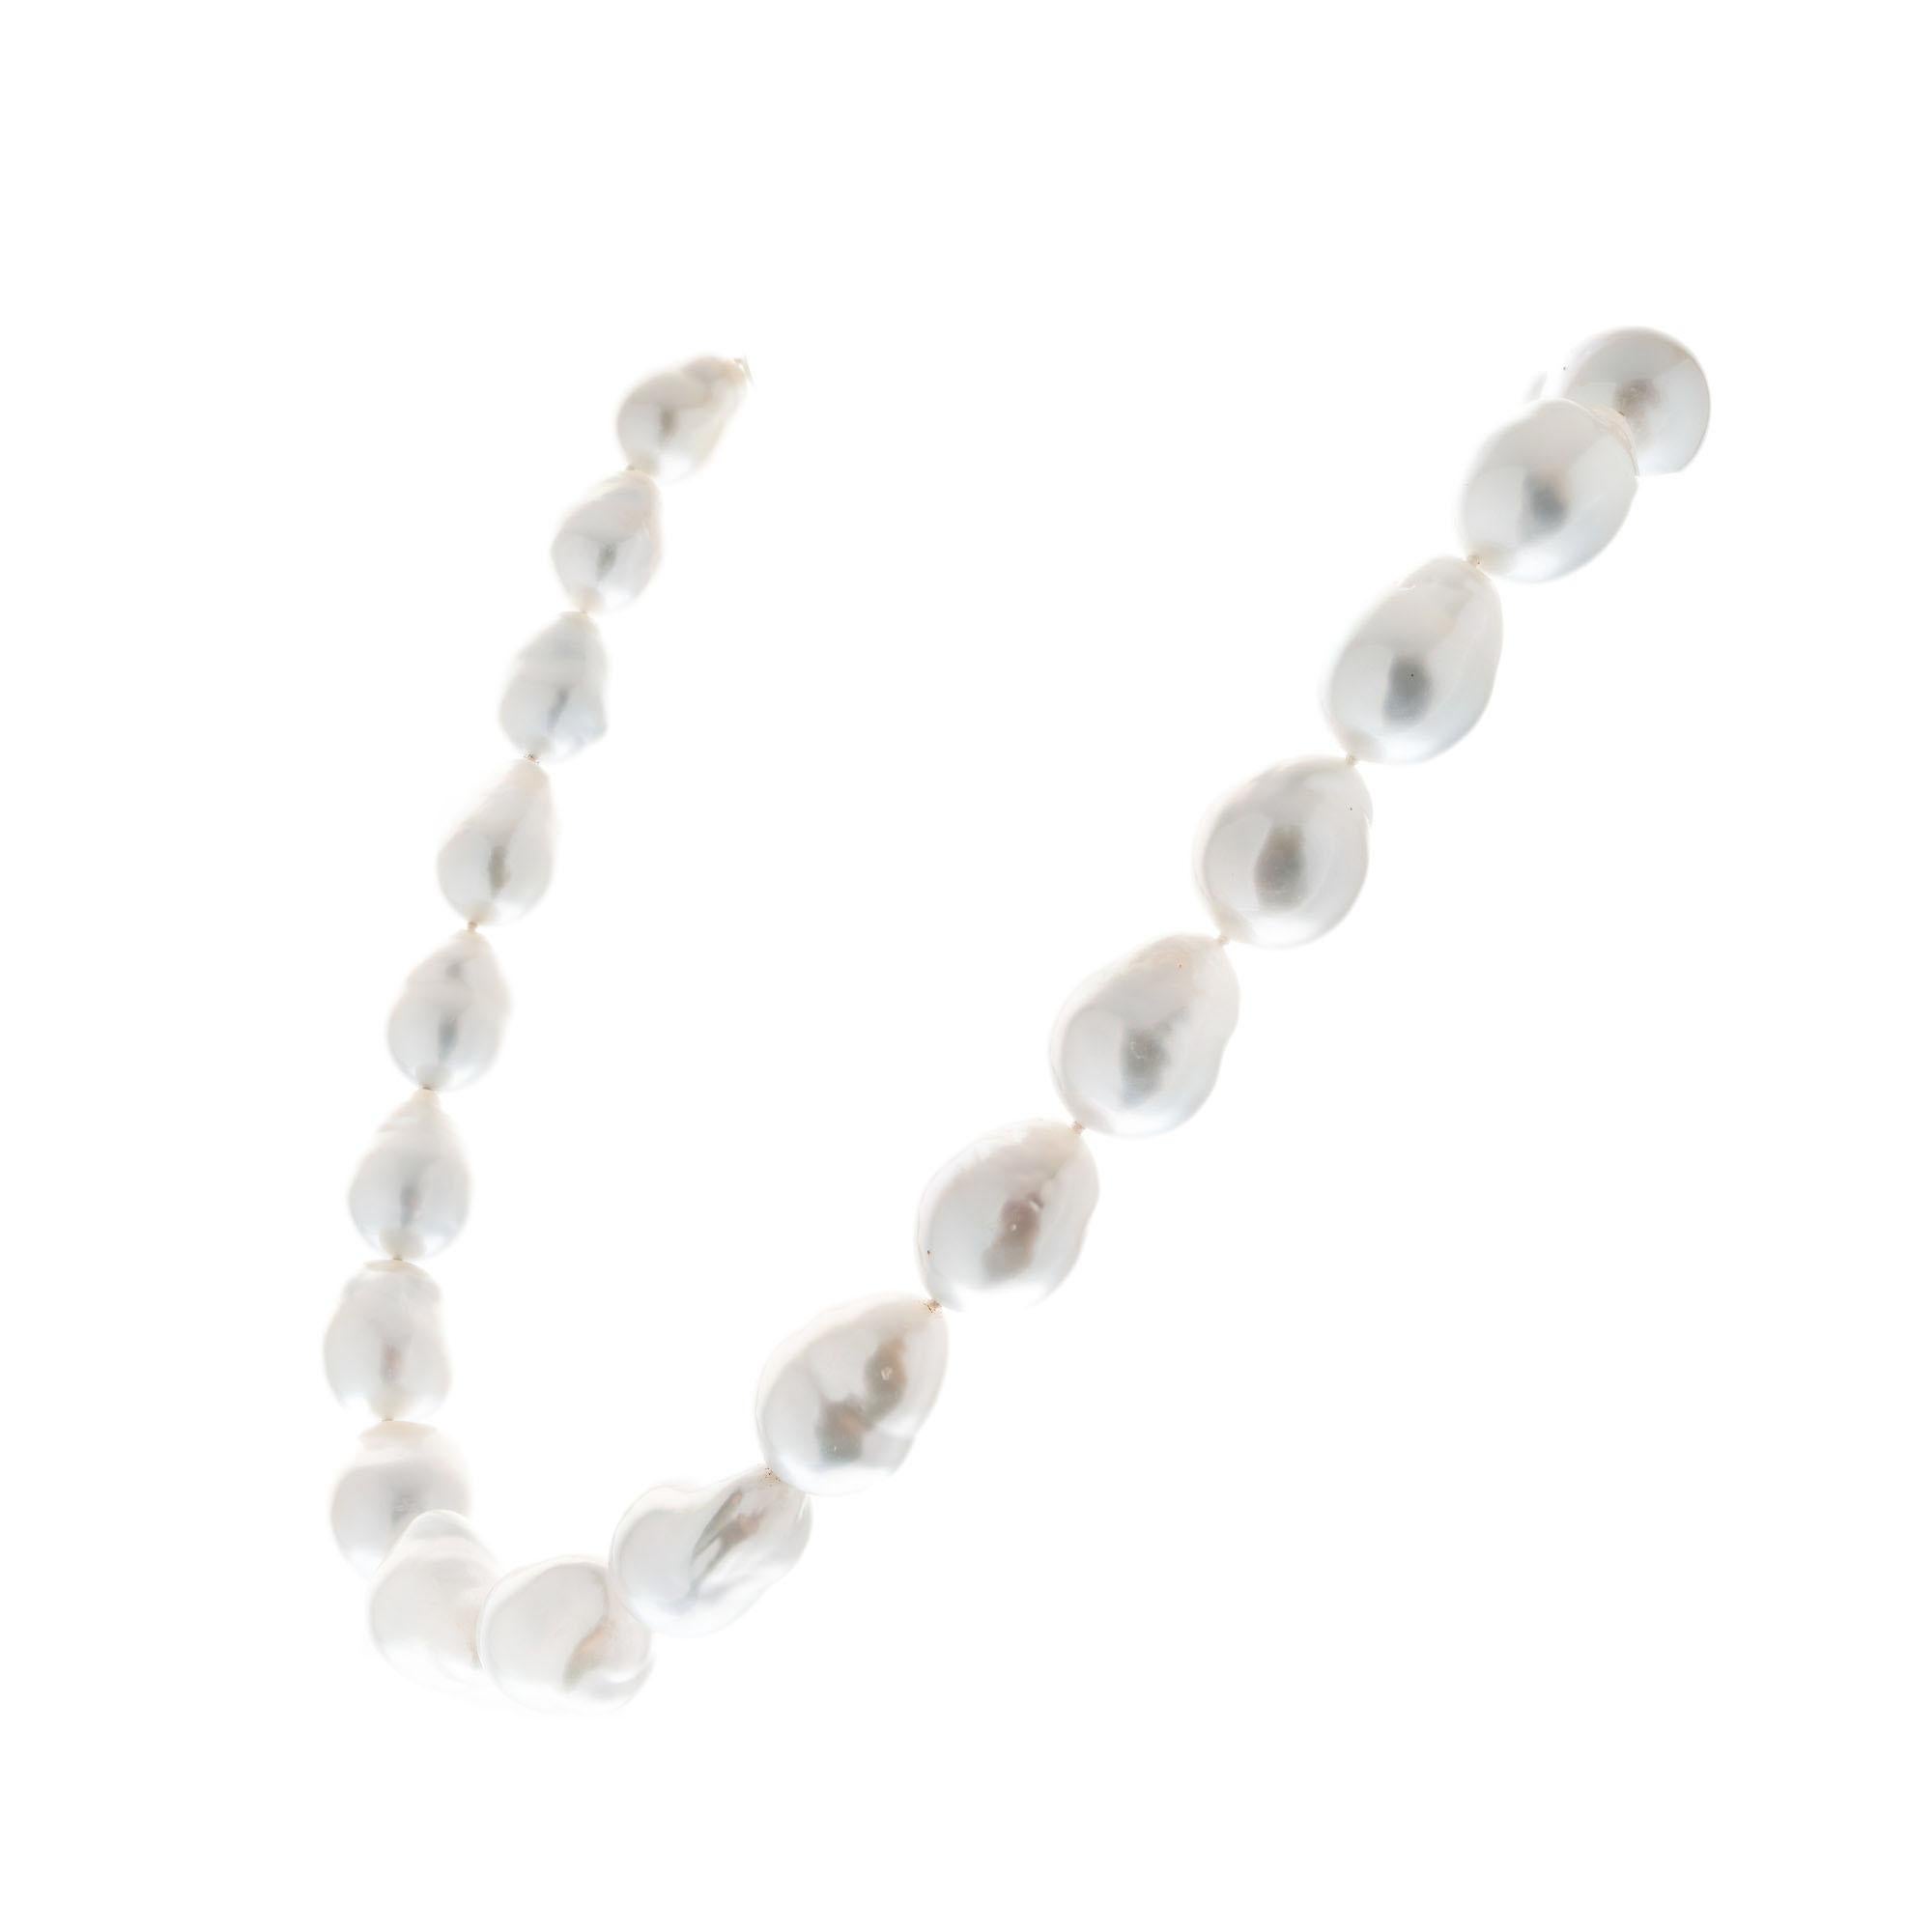 Mikimoto Baroque South Sea Pearl Gold Necklace. 25 baroque pearls with a Mikimoto round 18k white gold  ball clasp. 18.50 inches long. 

25 south sea baroque pearls, 15.5x13mm- 19.5x16mm
1 round diamond 
Length: 18.50
18k white gold
Stamped: